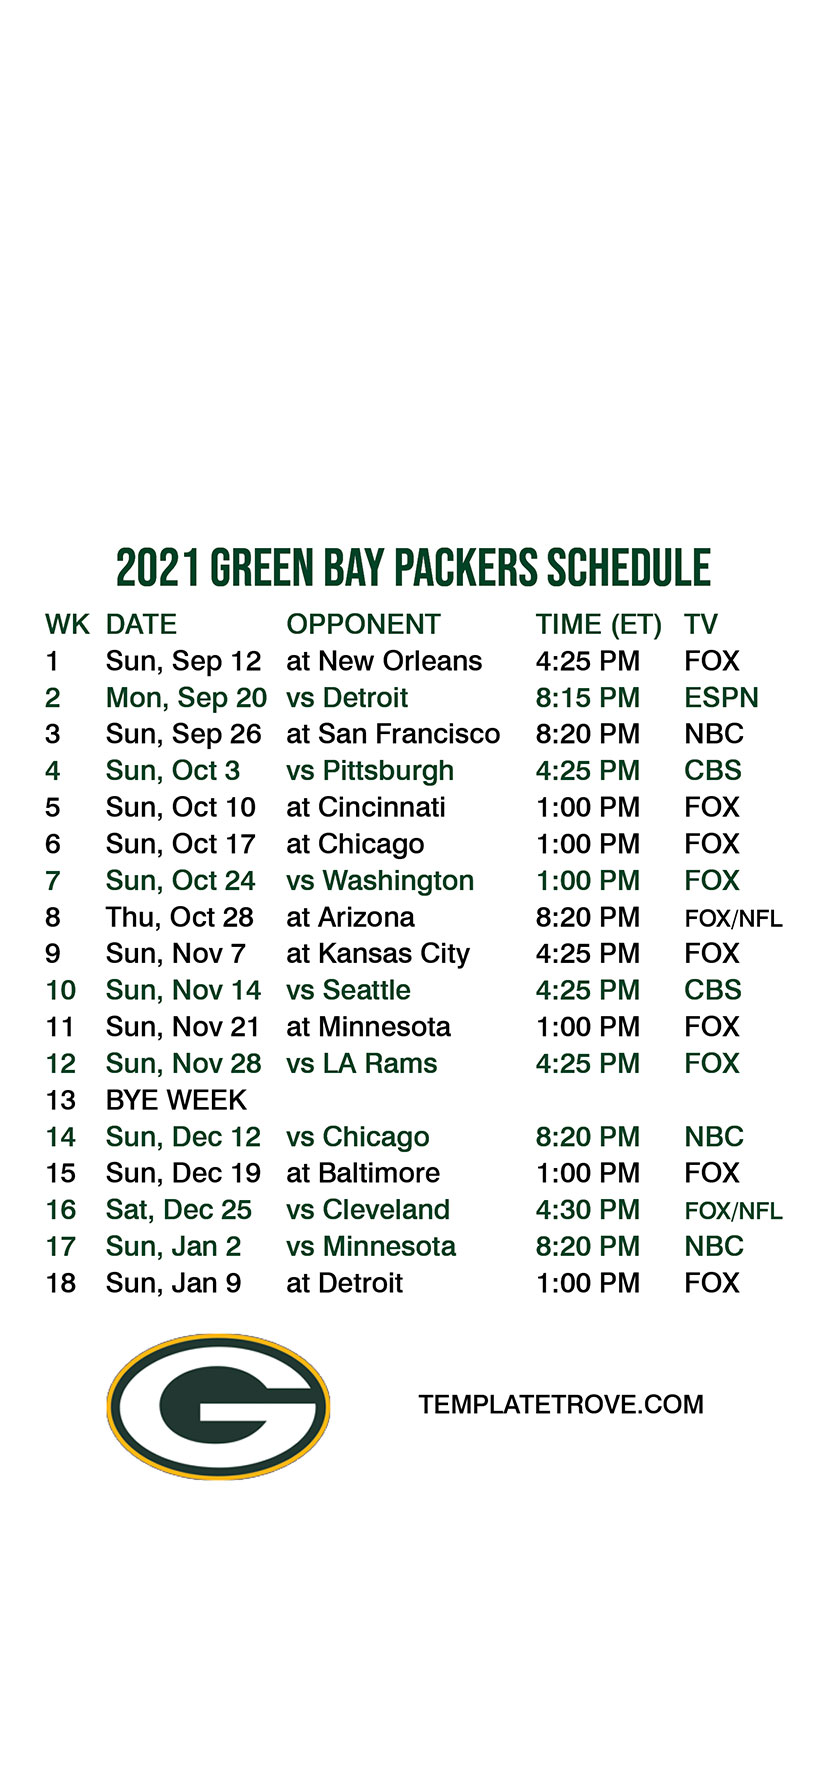 2021-2022 Green Bay Packers Lock Screen Schedule for iPhone 6-7-8 Plus